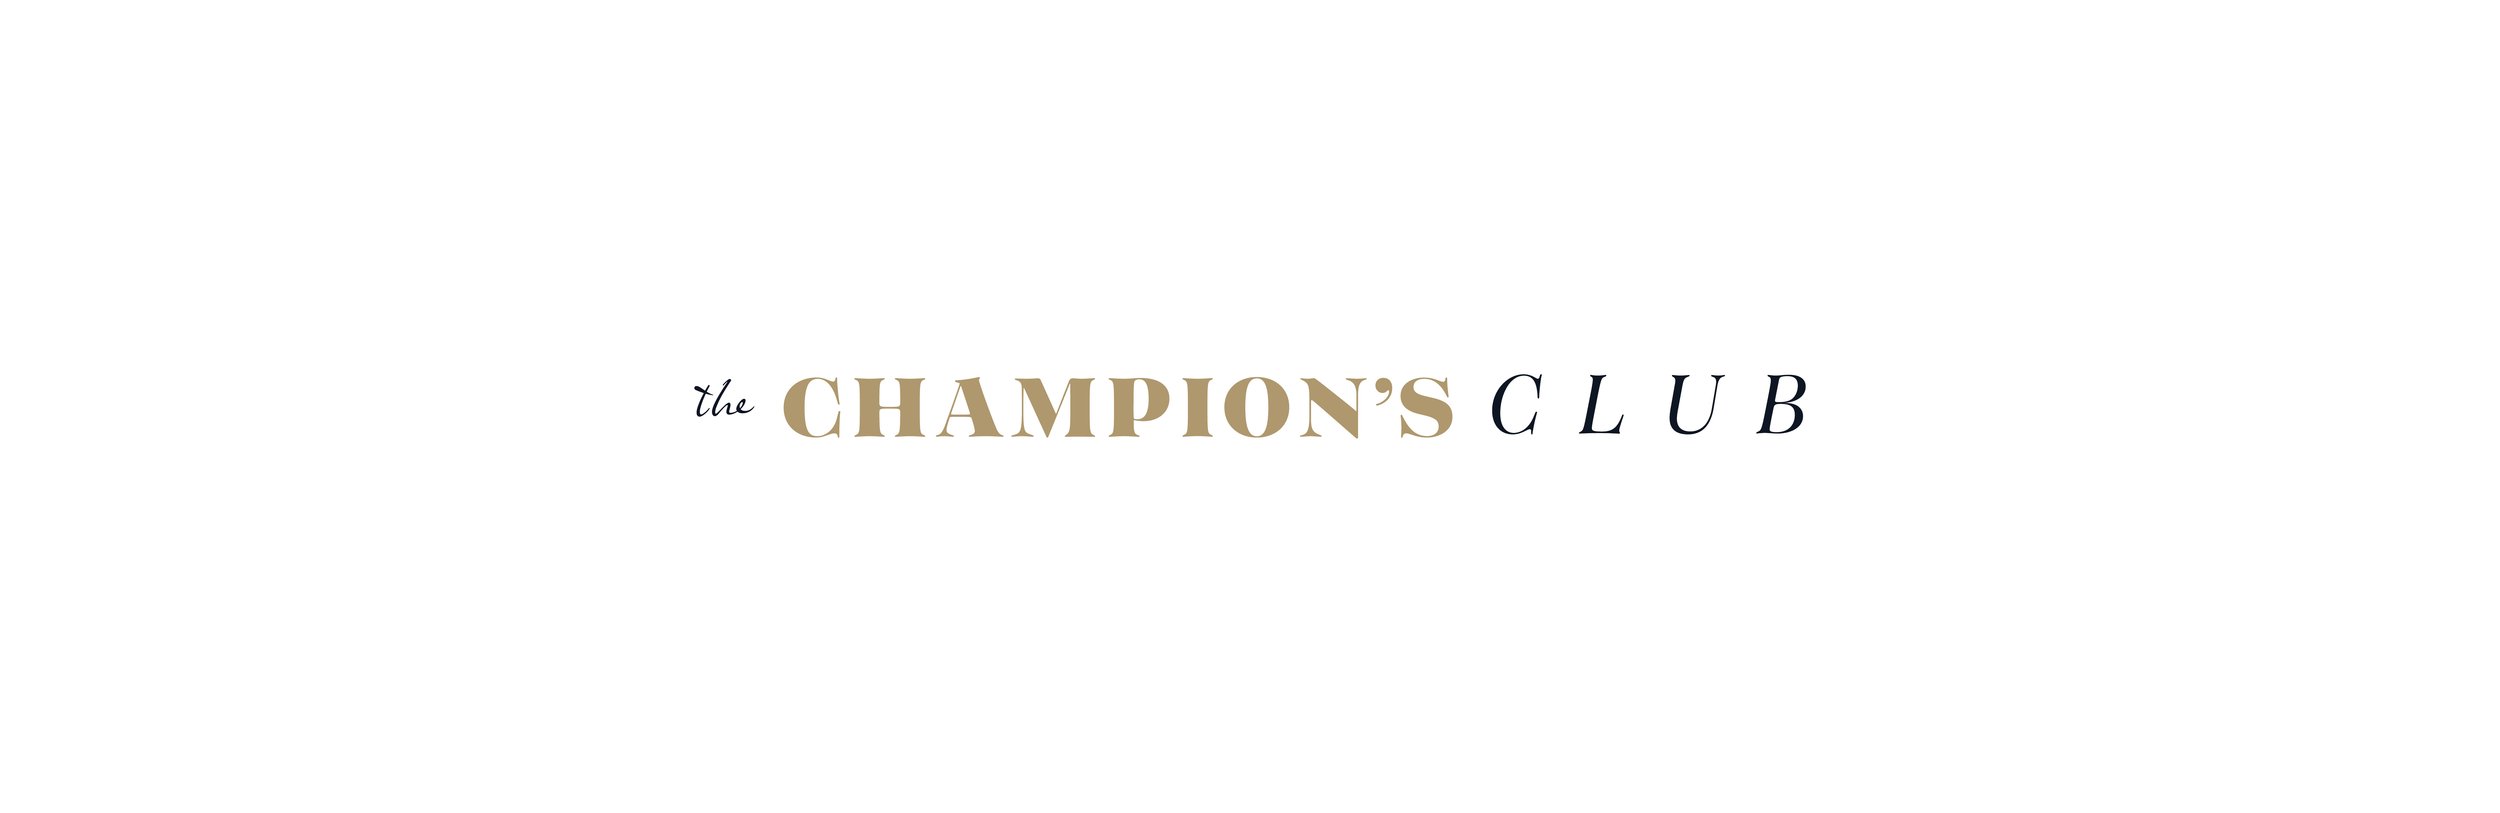  The Champions Club at Pelican Golf Club Pelican Women's Championship typeface. 